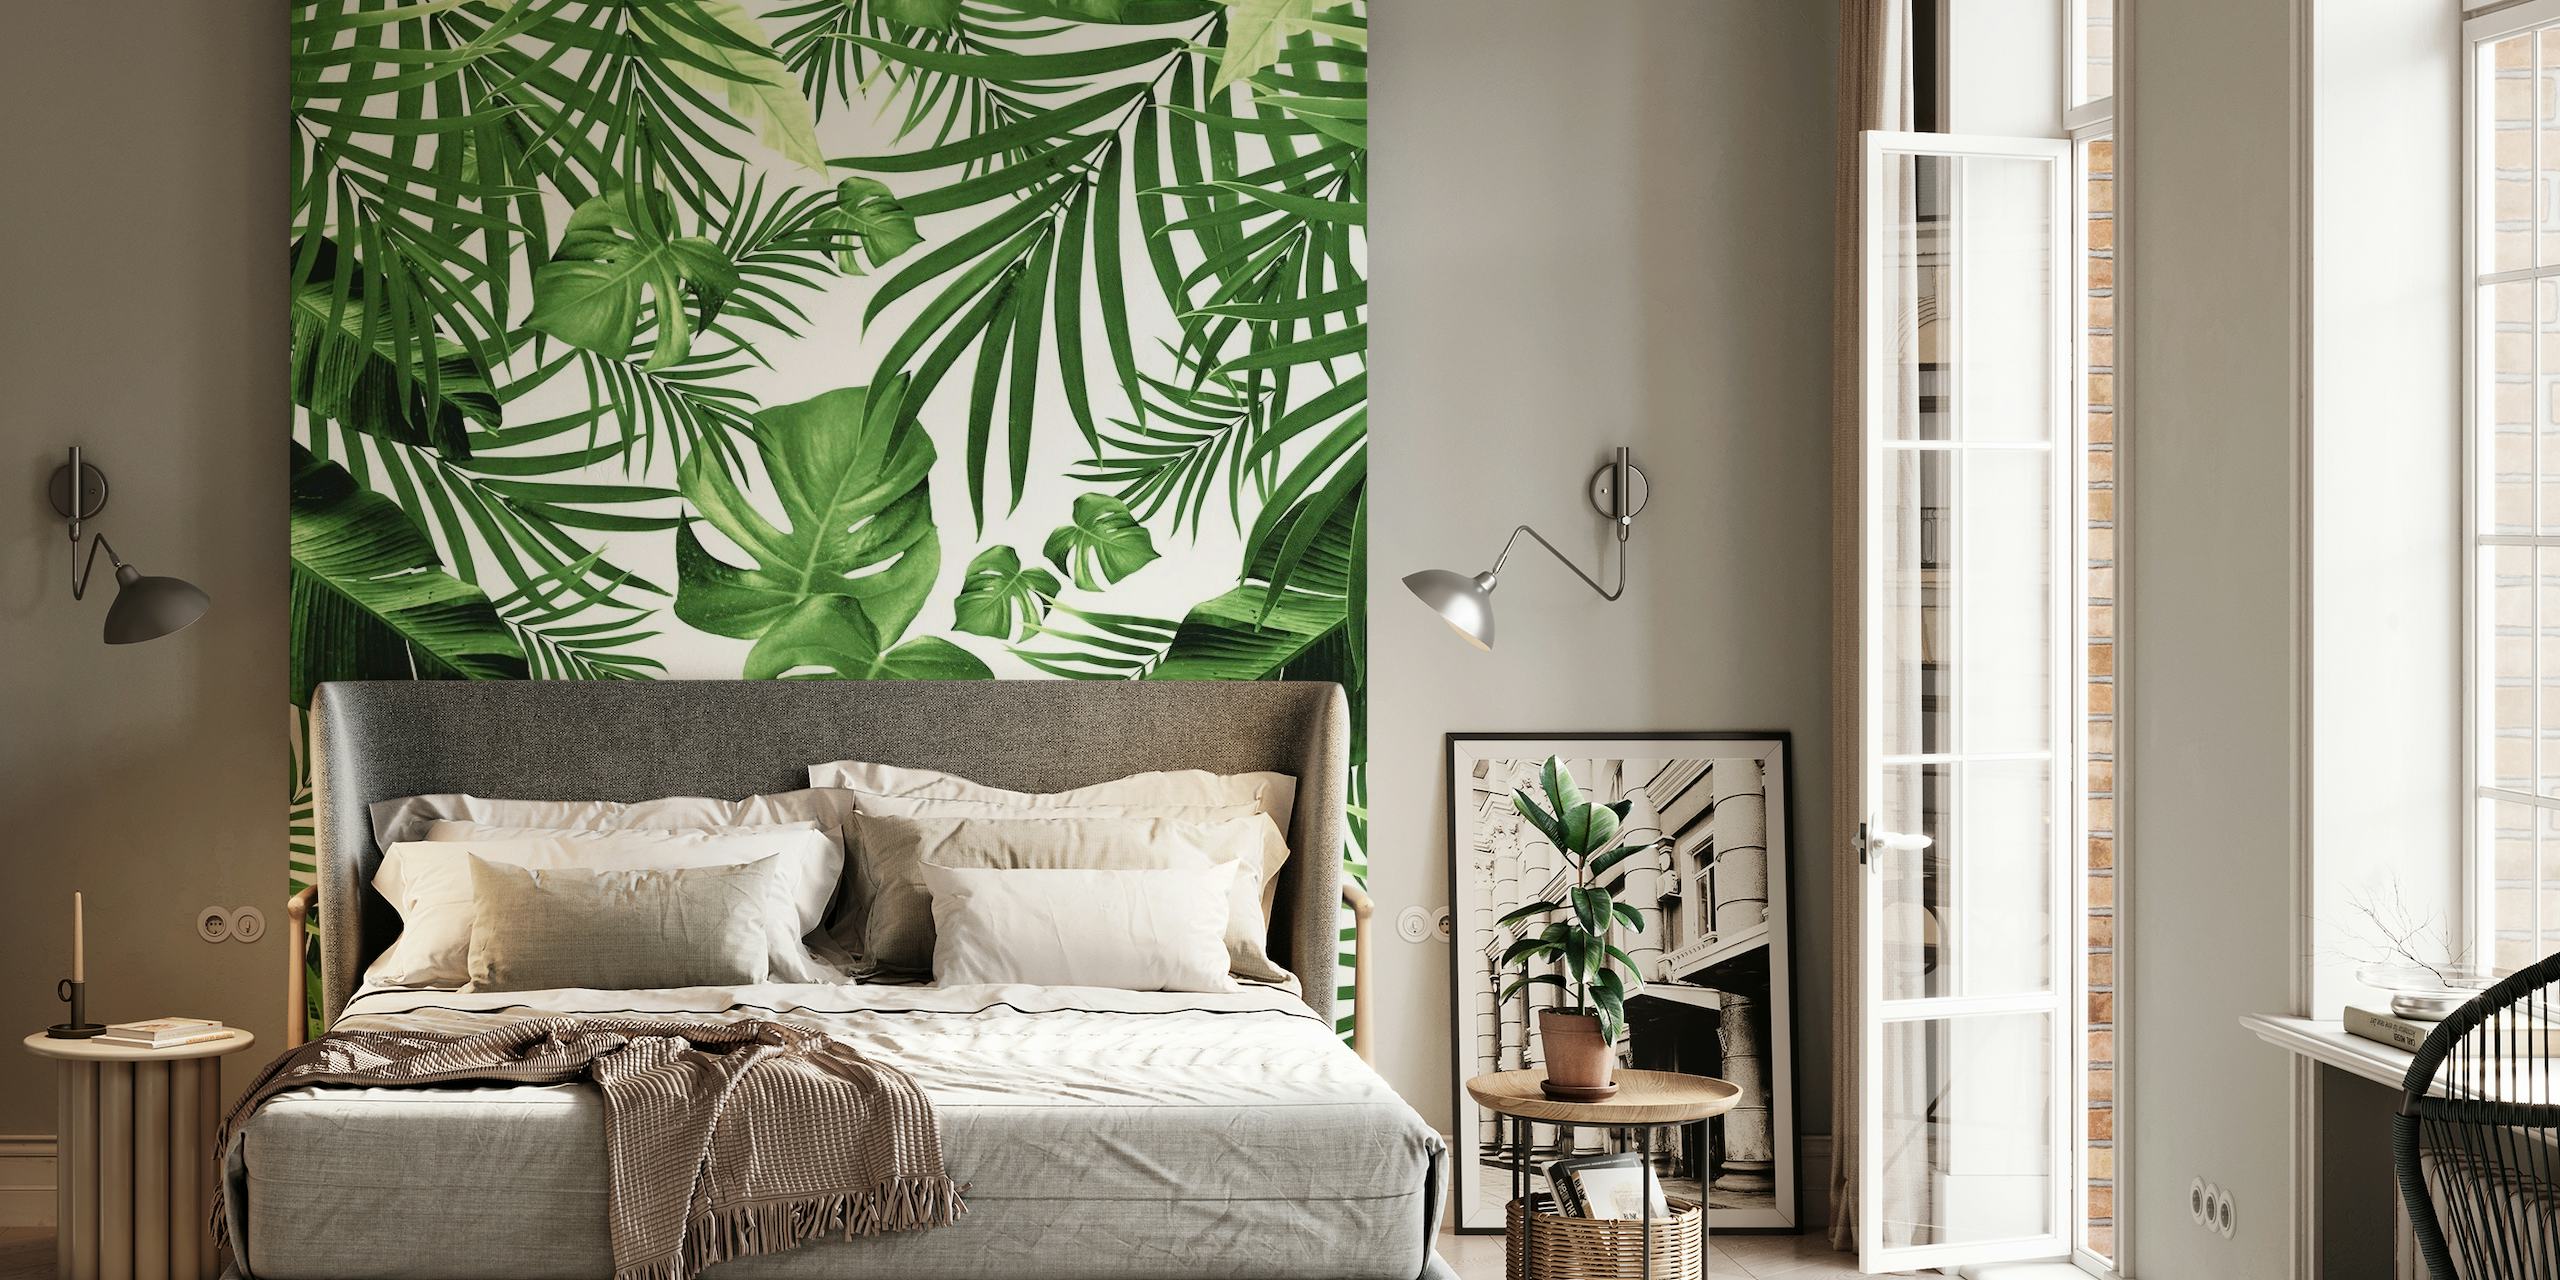 Tropical Jungle wall mural with green palm and monstera leaves